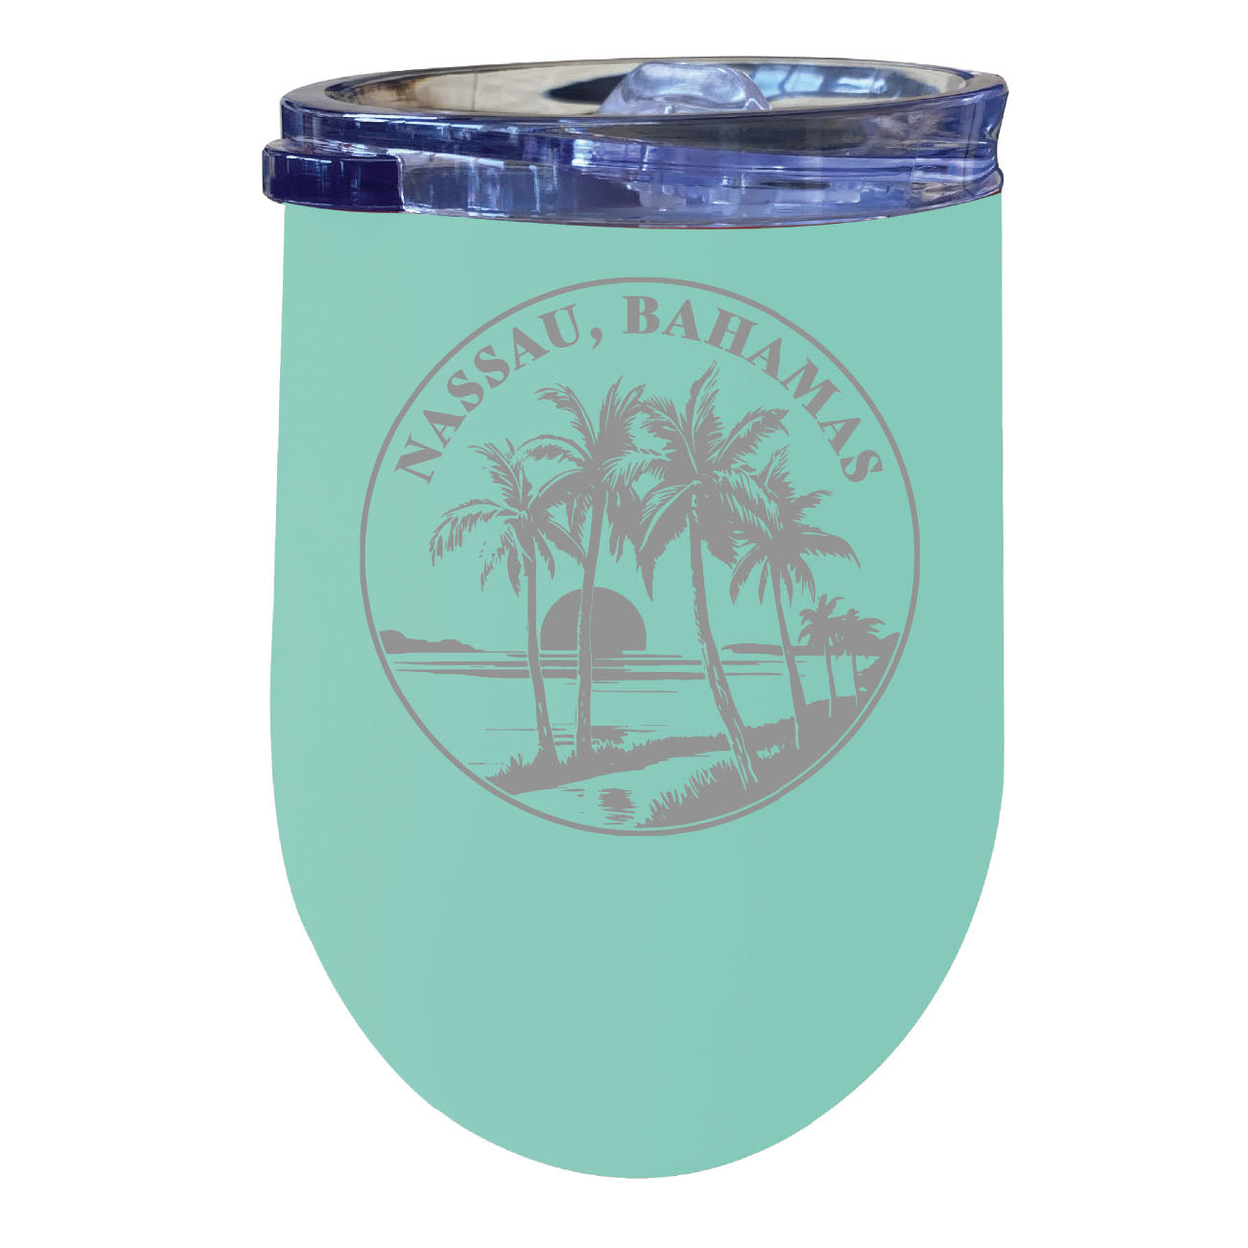 Nassau The Bahamas Souvenir 12 Oz Engraved Insulated Wine Stainless Steel Tumbler - Navy,,4-Pack